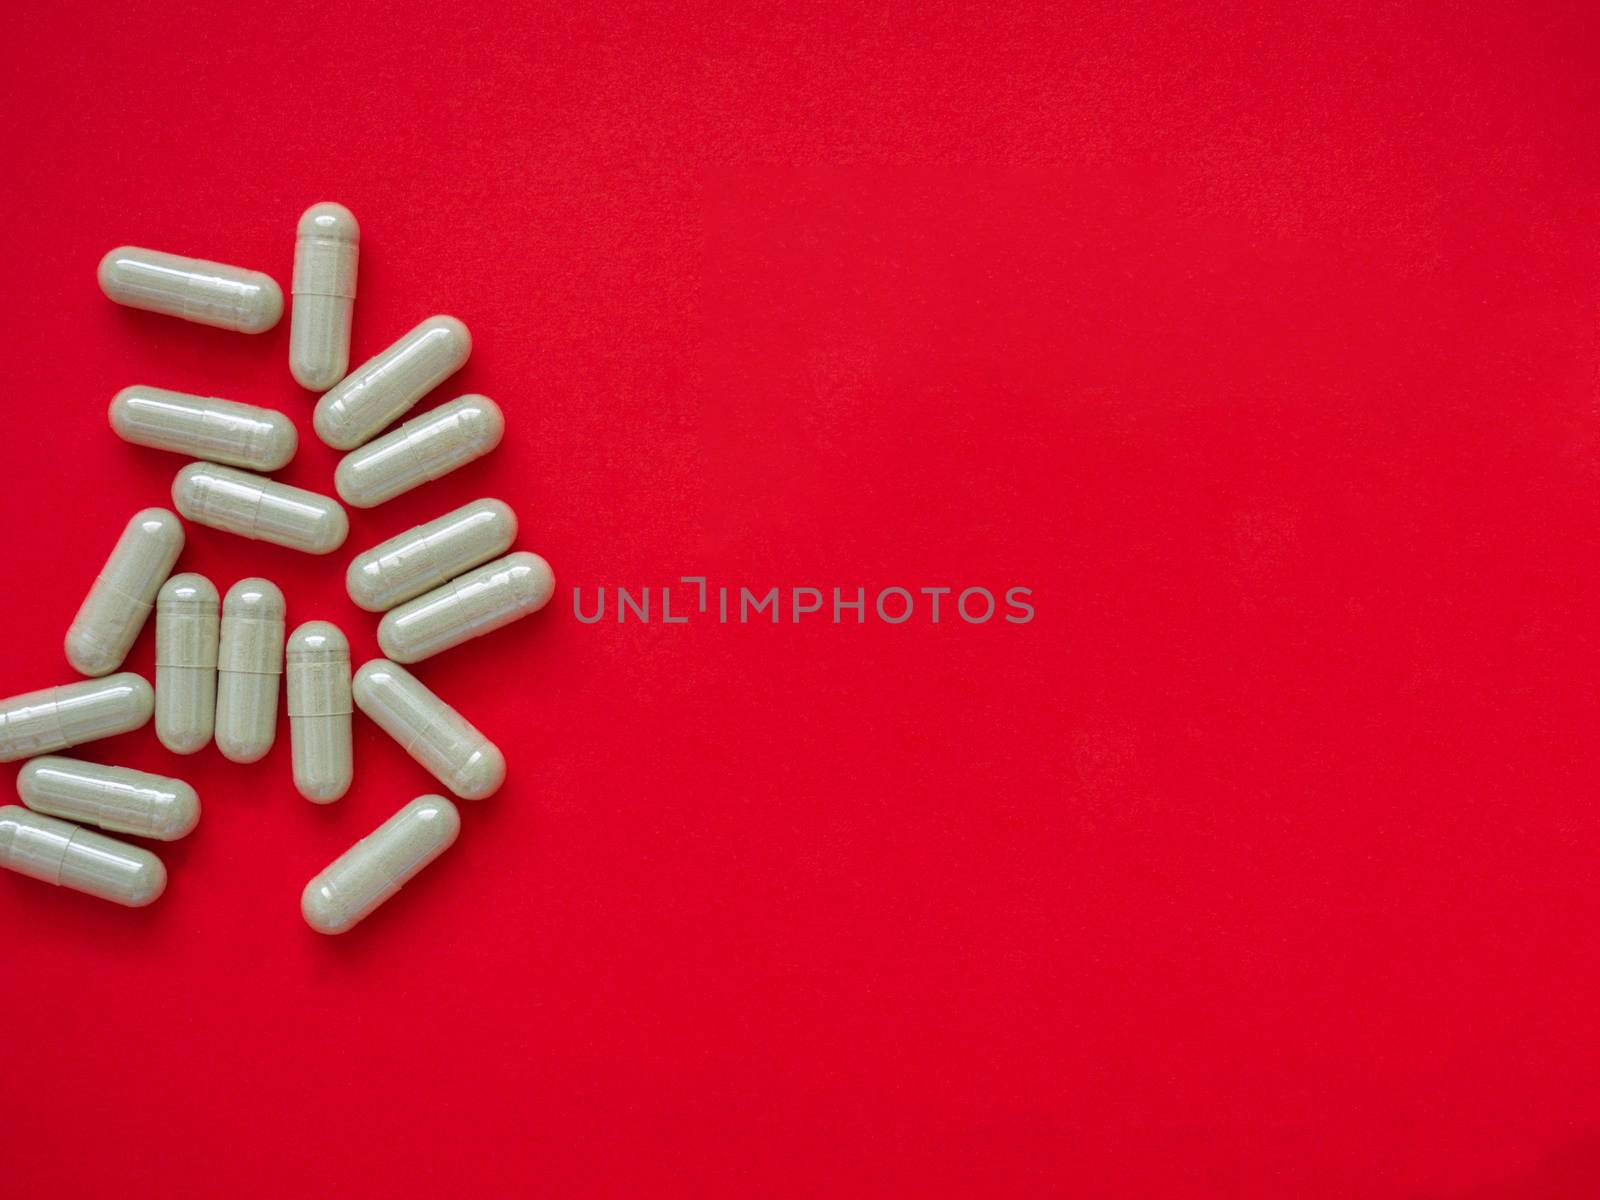 Gray pills for the treatment of body disorders are arranged on a red background